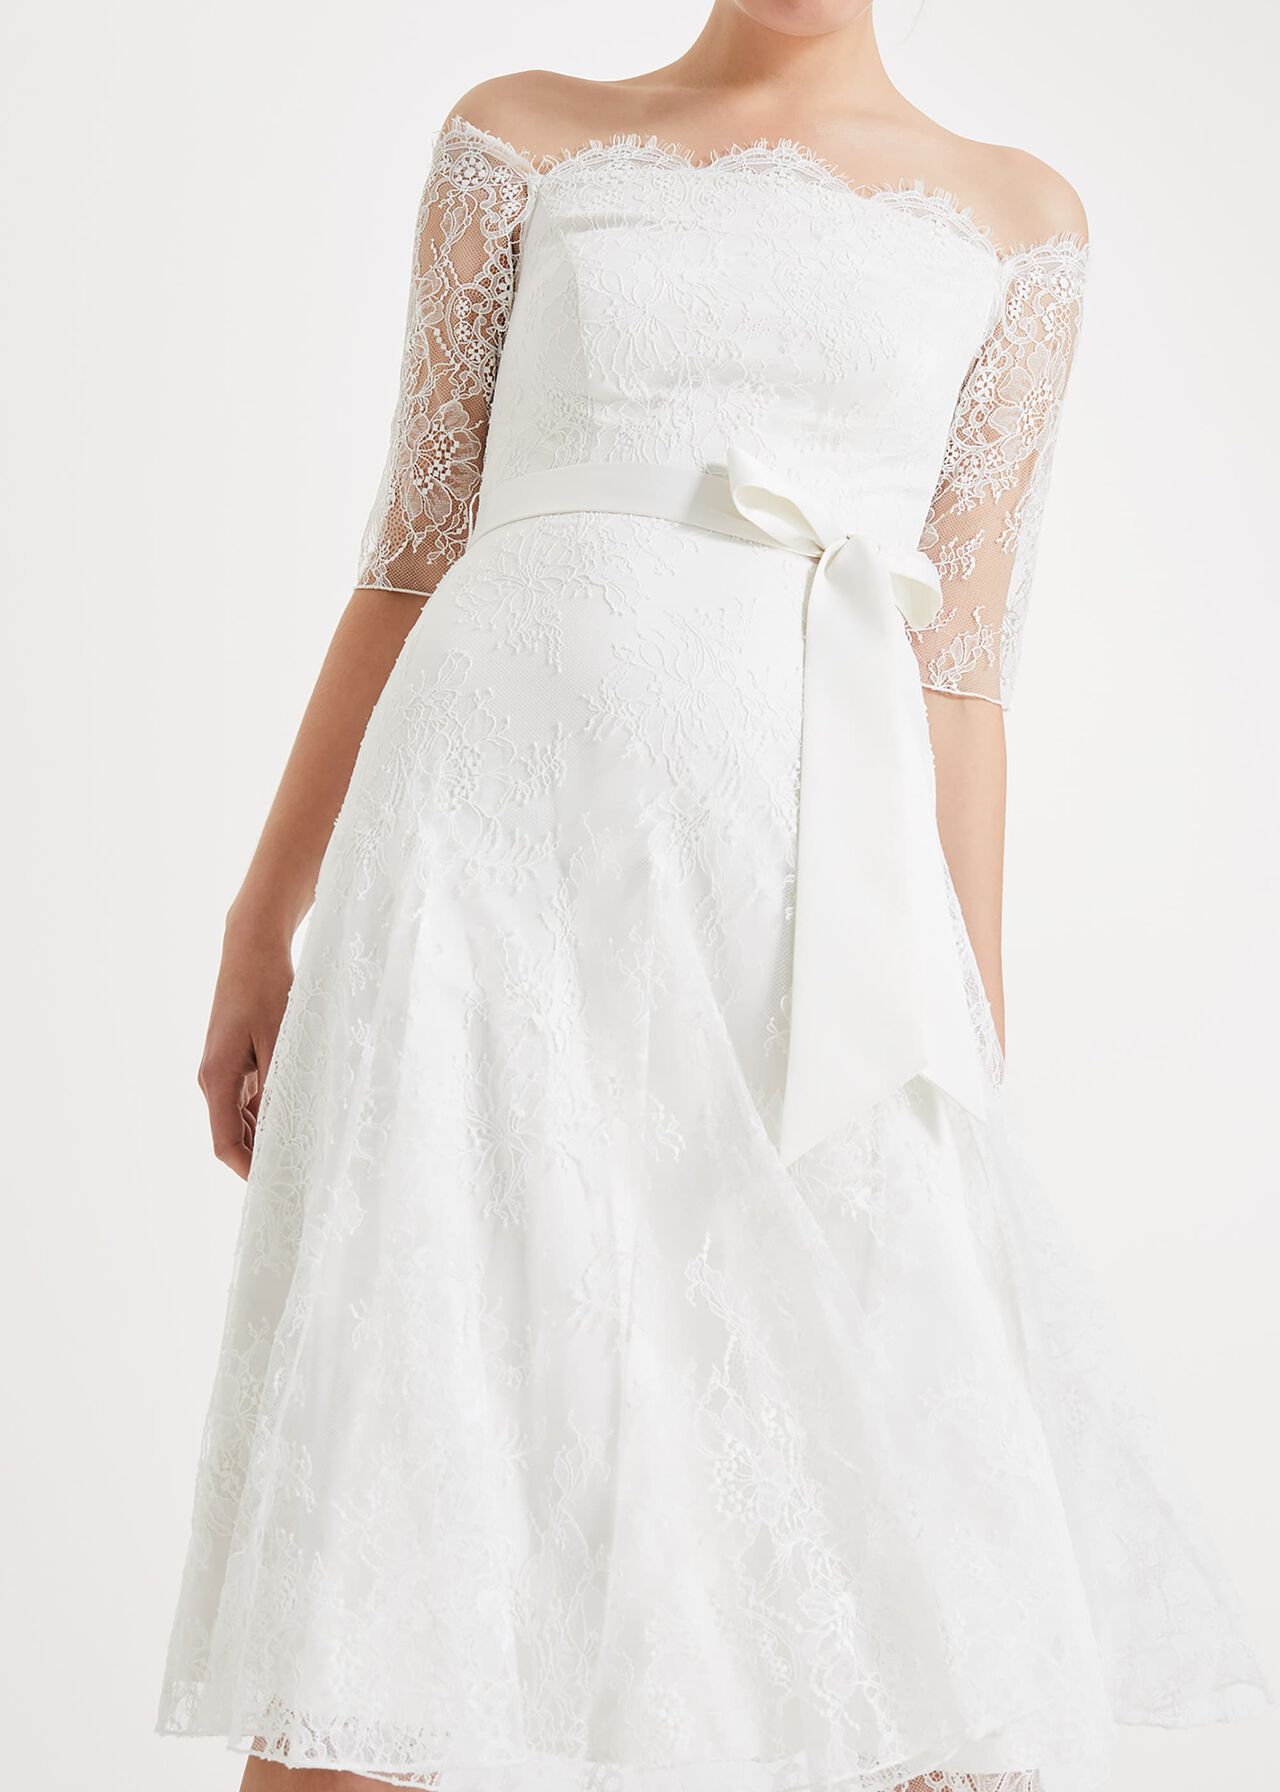 Phase Eight – Evette Lace Wedding Dress Mariage Civil PHASE EIGHT